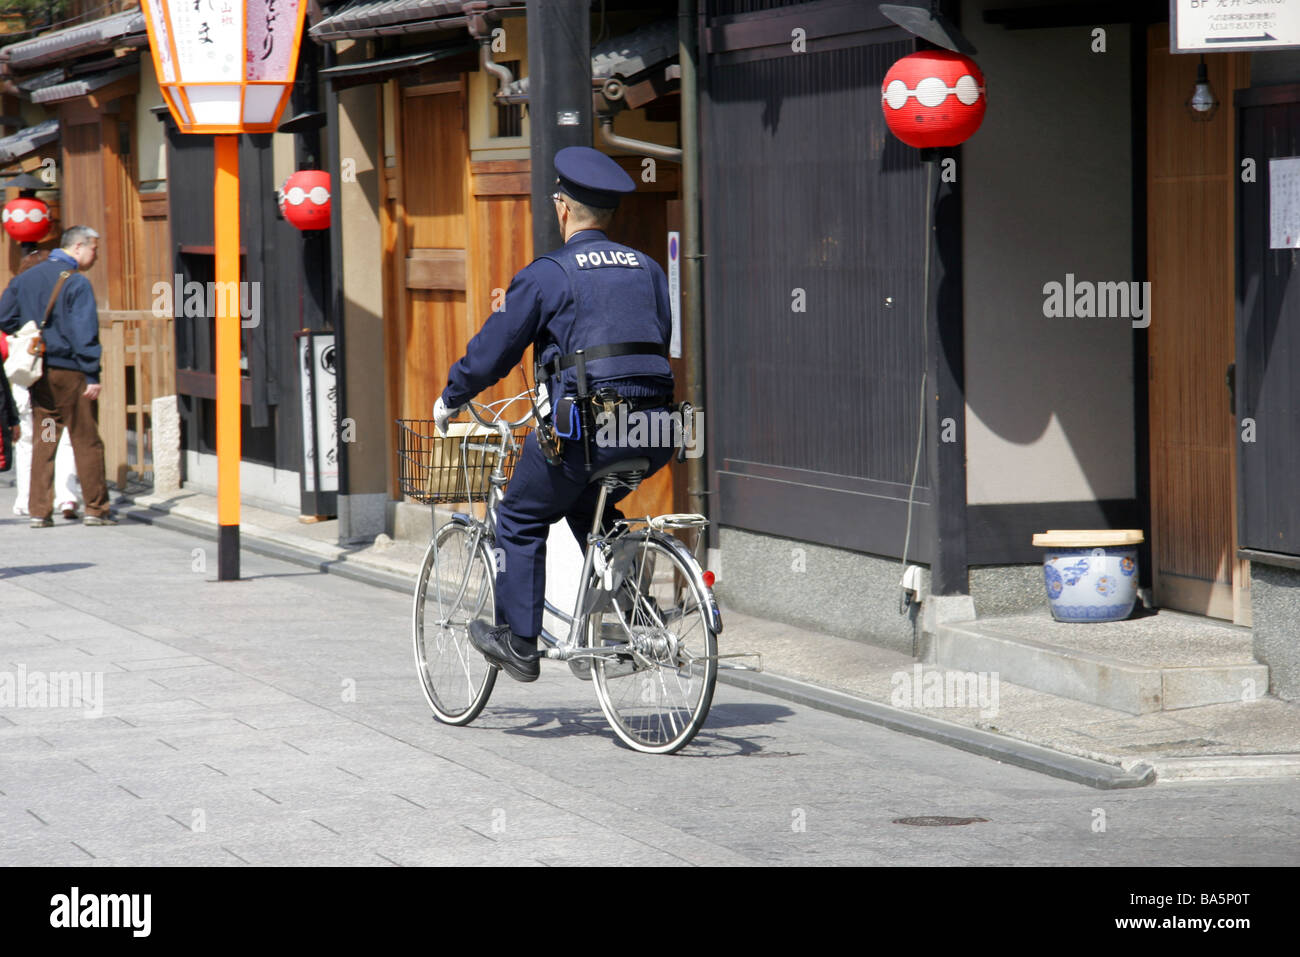 Japanese police officer riding a bicycle in the Gion district of Kyoto Japan Stock Photo